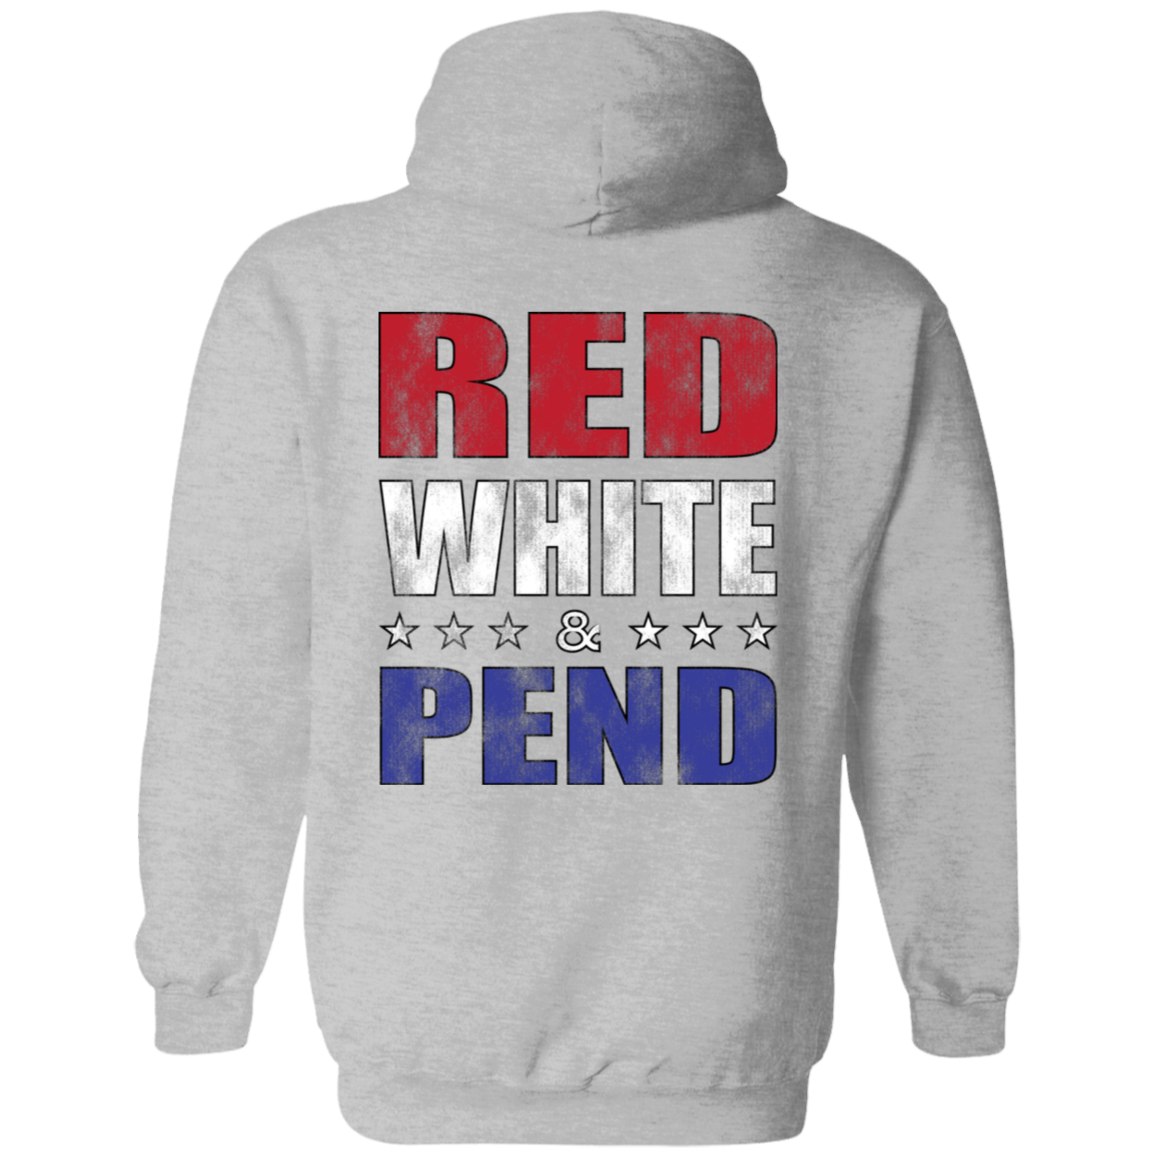 Red White & Pend (on Back) Hoodie